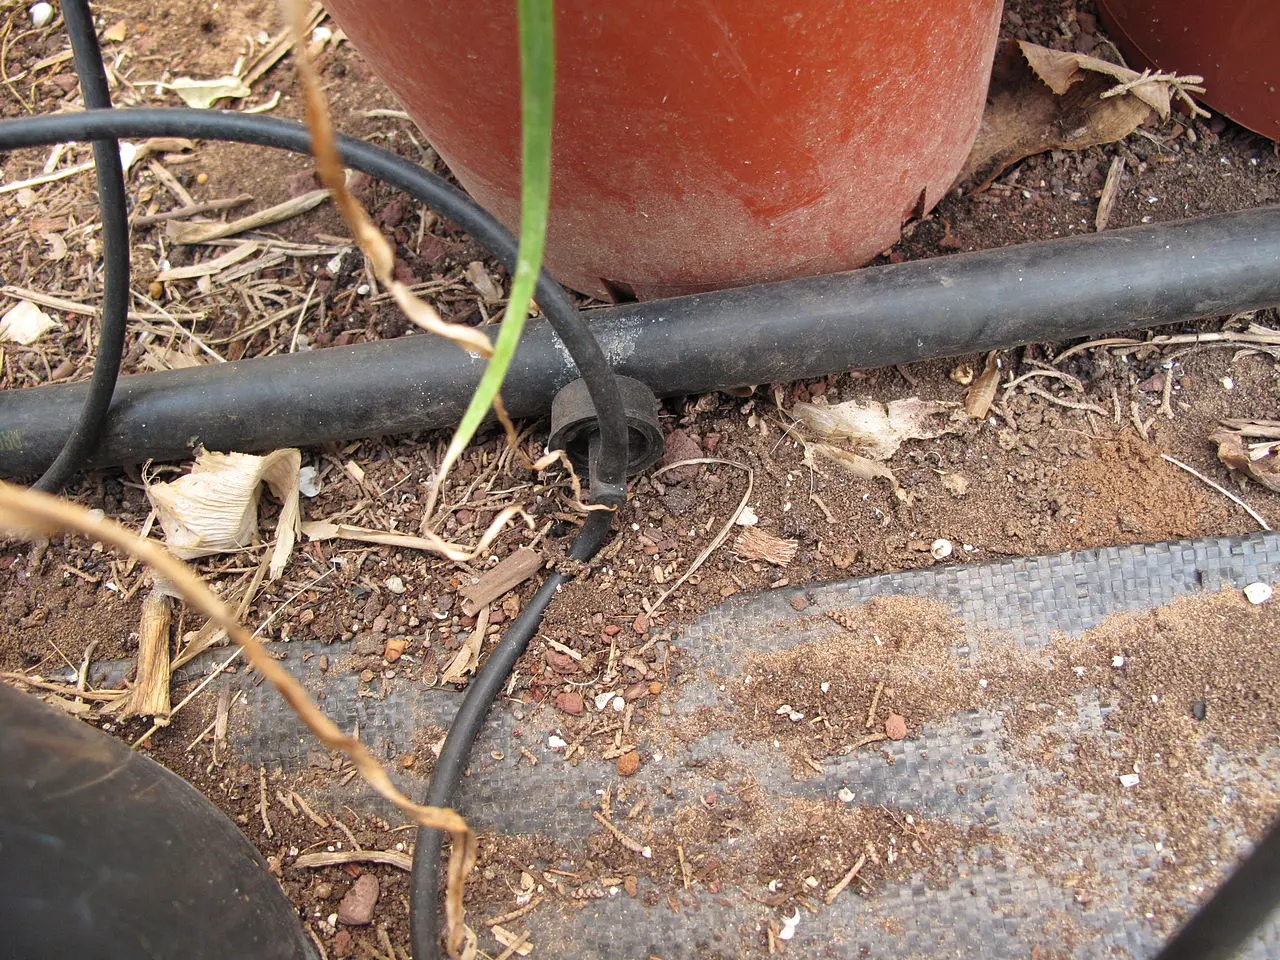 Closeup of drip irrigation system with emitters having "spaghetti tubing" branching off; shown next to plant pot/ 